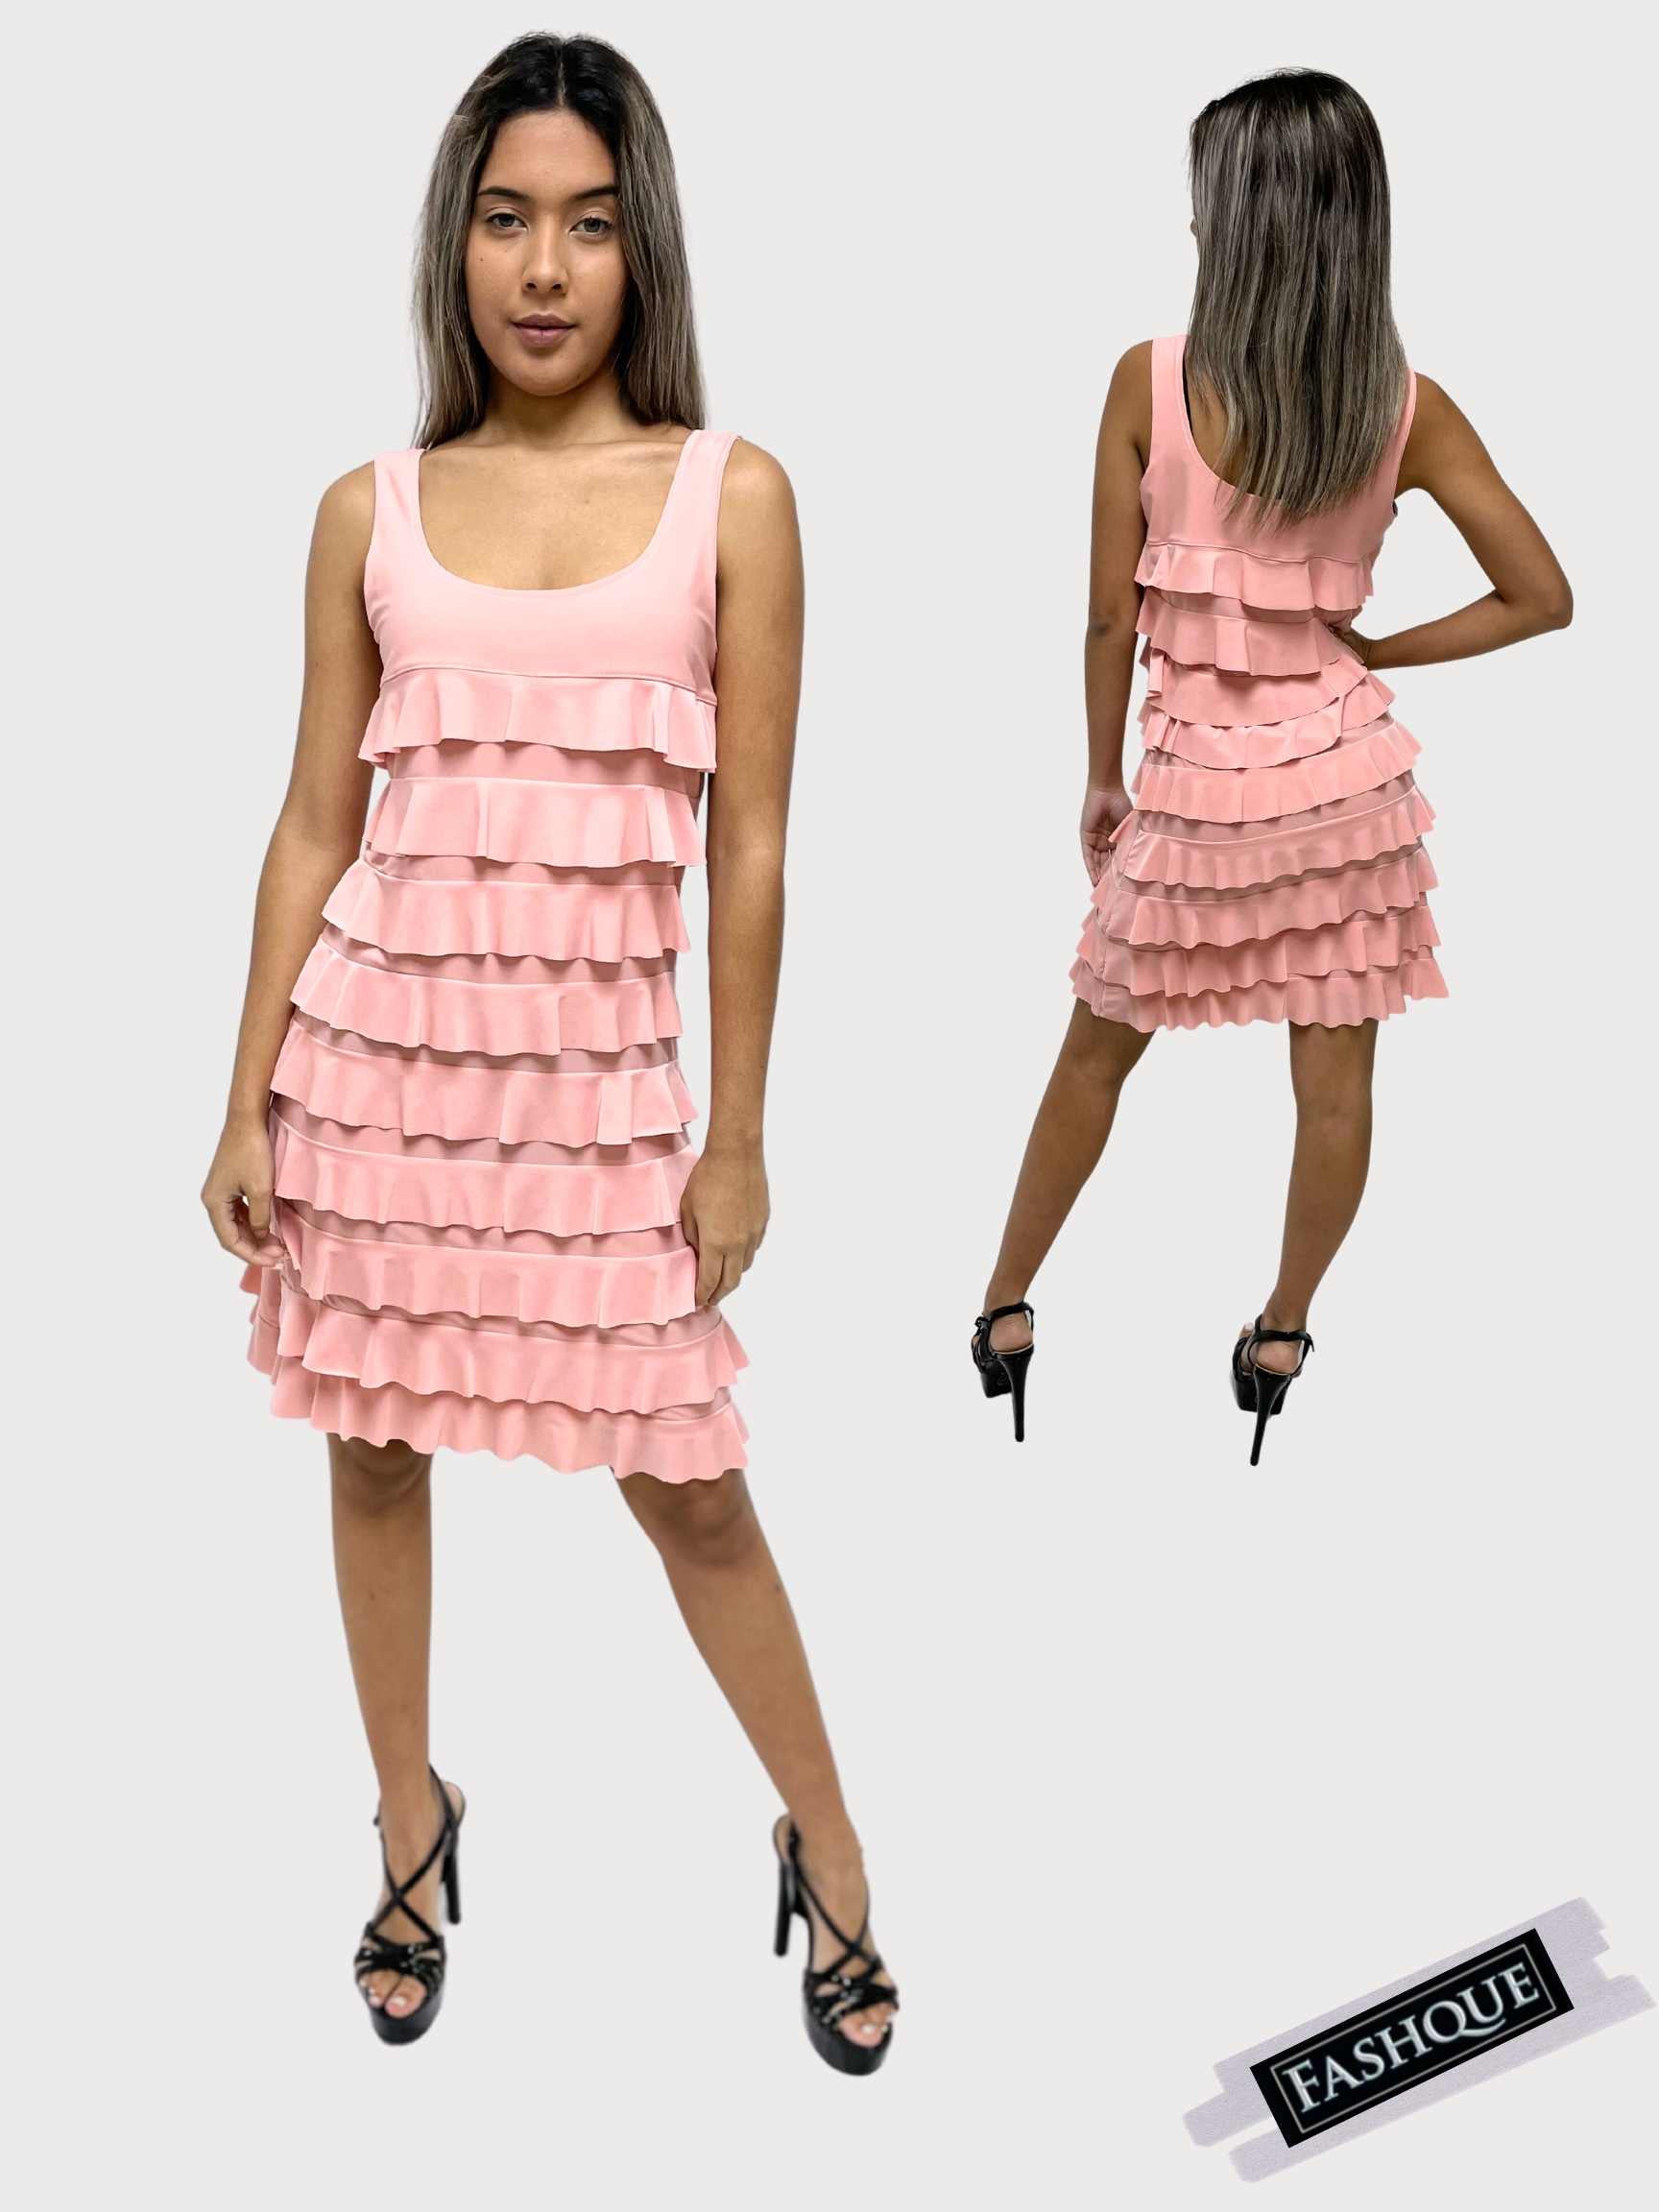 FASHQUE - CHACHA Ruffle Sleeveless Knee length Dress- SOLID COLOR - D760